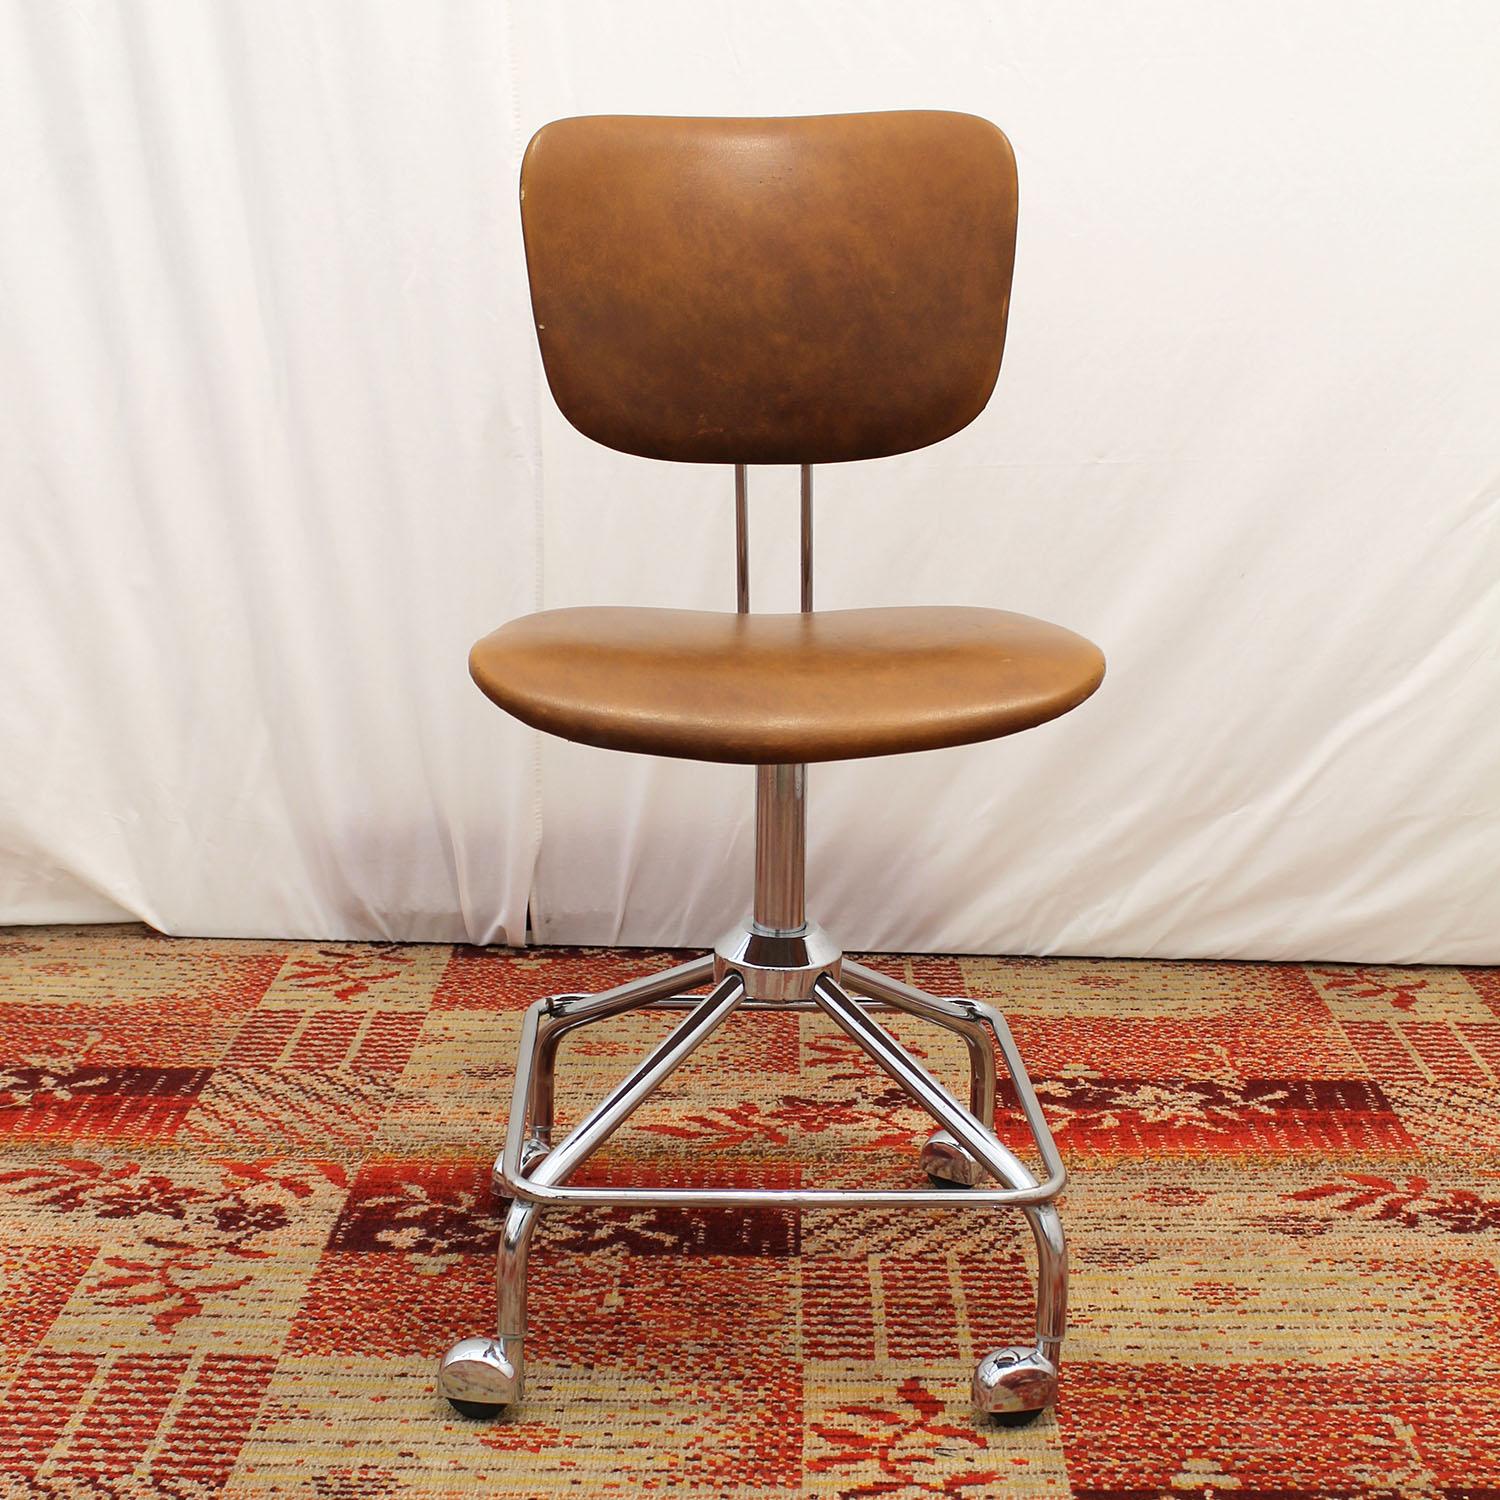 This vintage desk chair was made by Kovona company in the 1970s.

Fully functional, adjustable, rotatable. It's made of iron and leatherette. 

In good vintage condition.

The height of the chair is adjustable from 83 cm to 96 cm, seat height